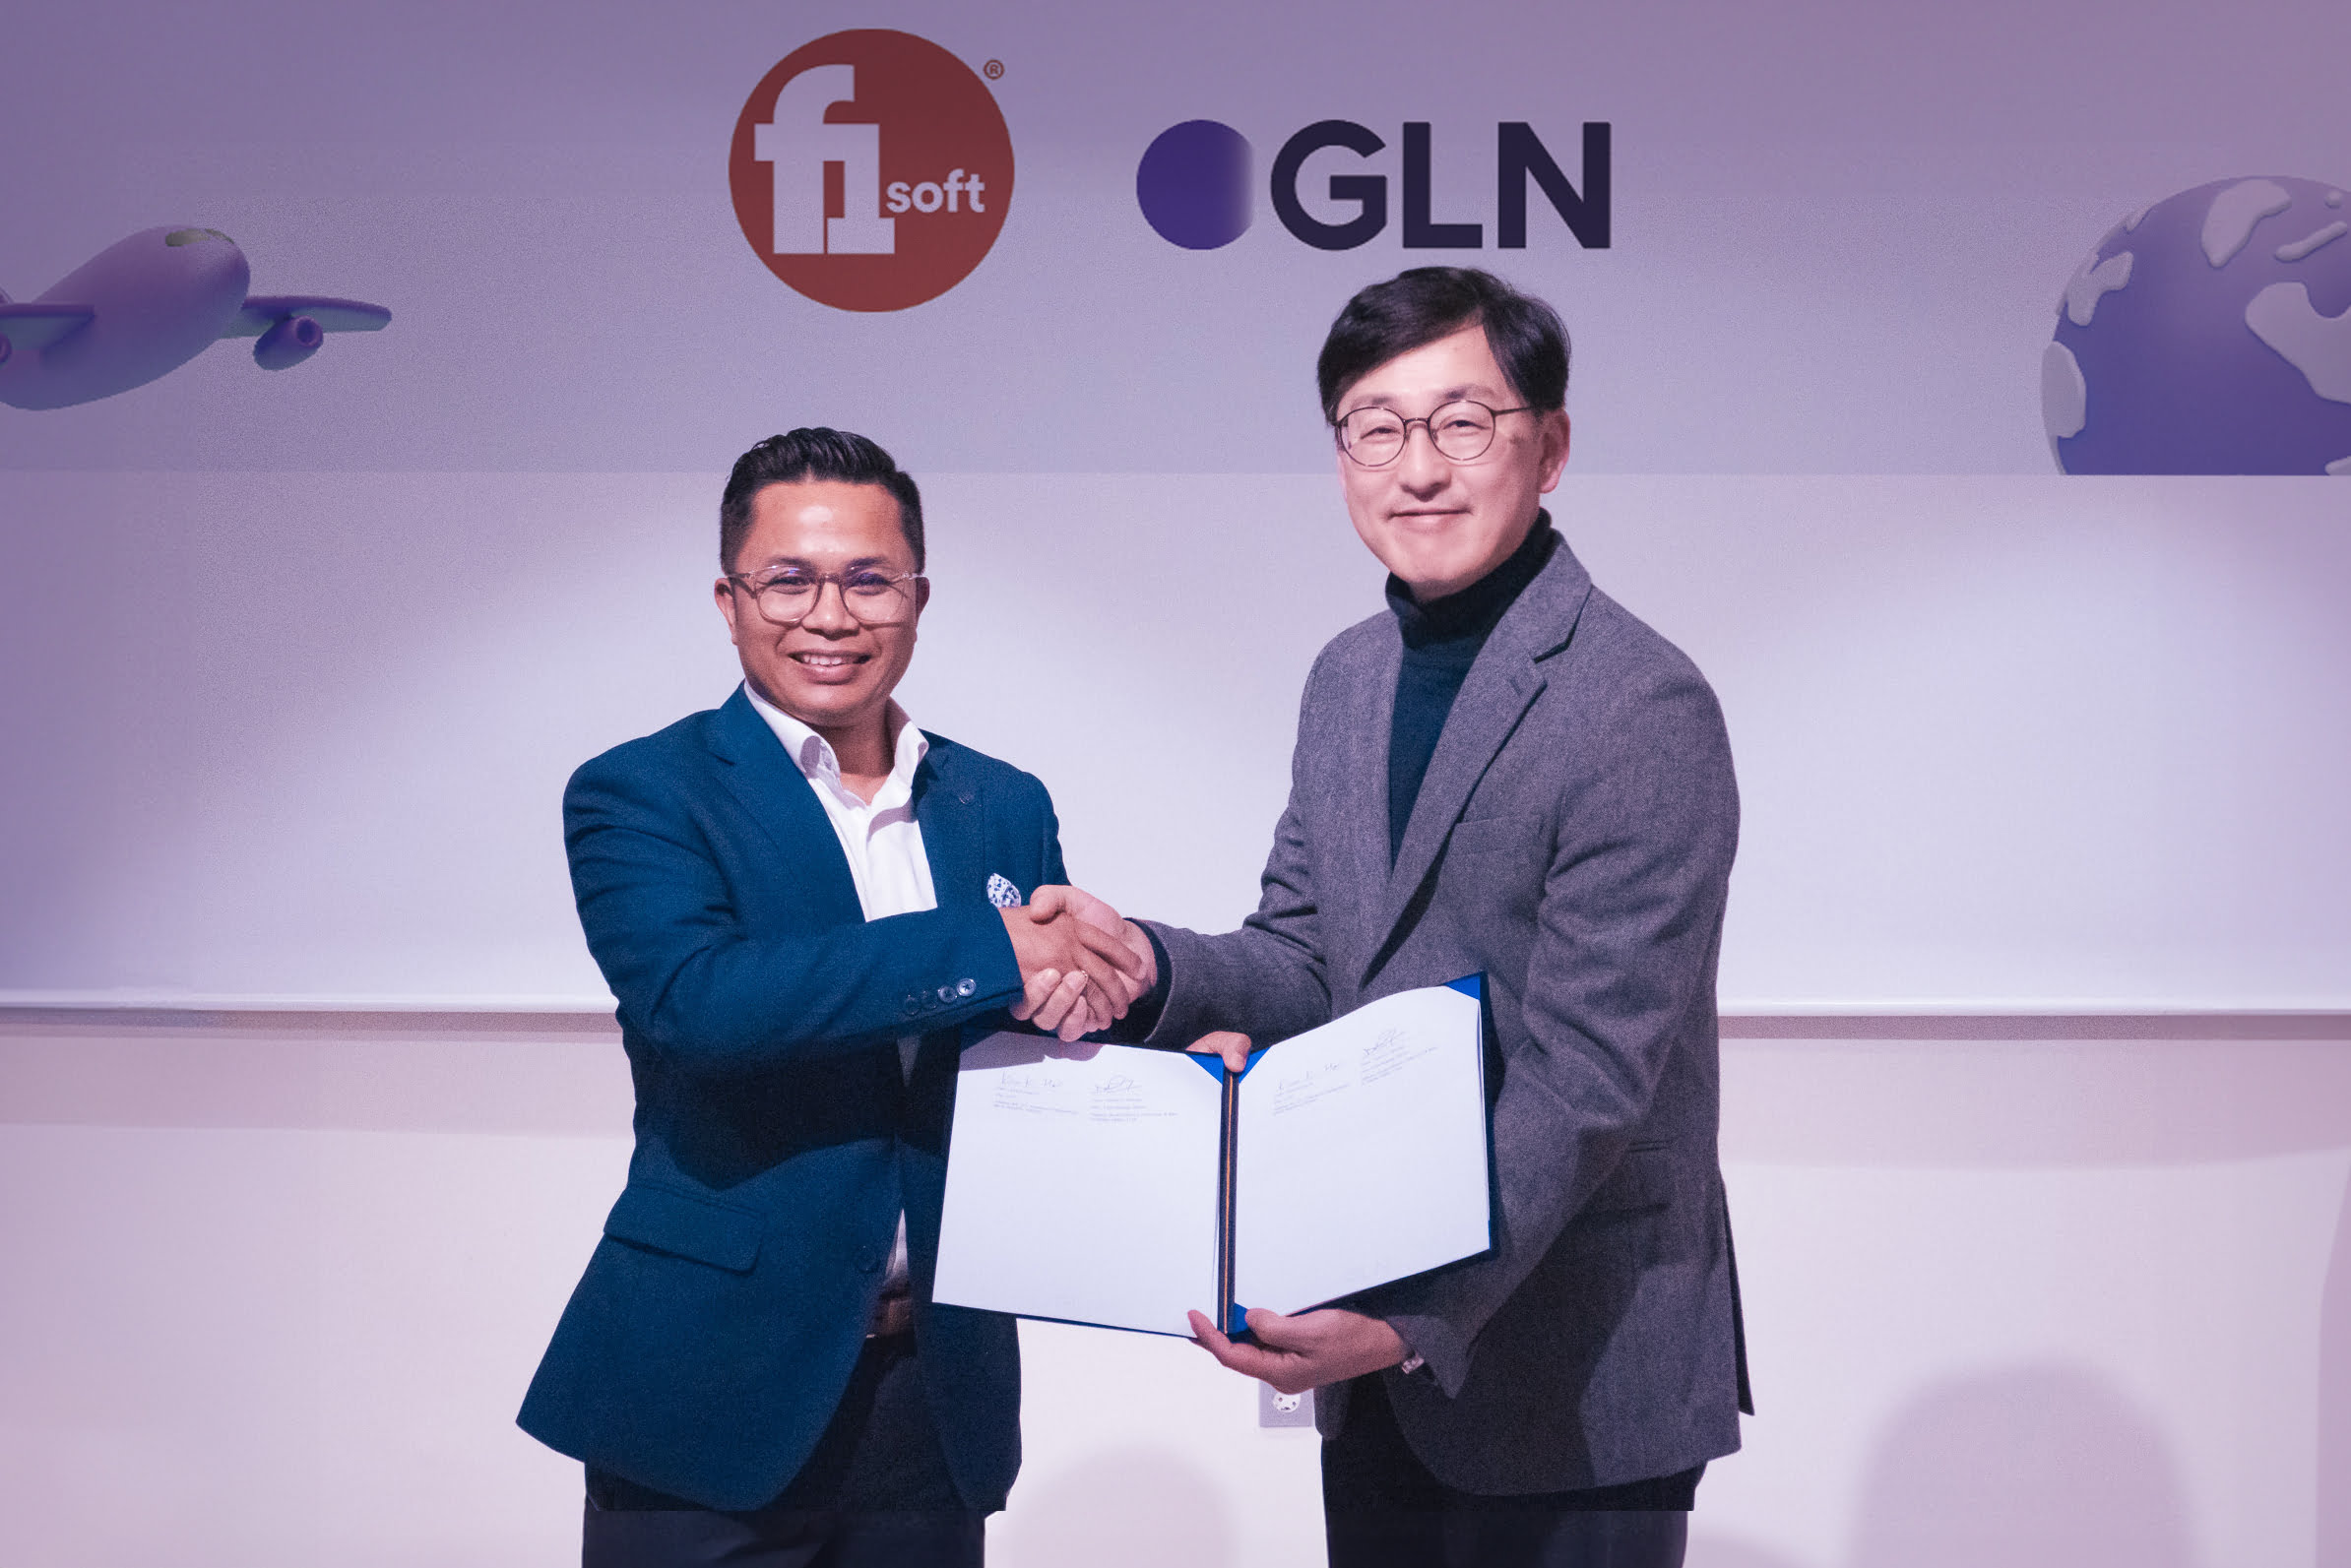 GLN International signs MOU with Fonepay for cross-border QR payment between Korea and Nepal